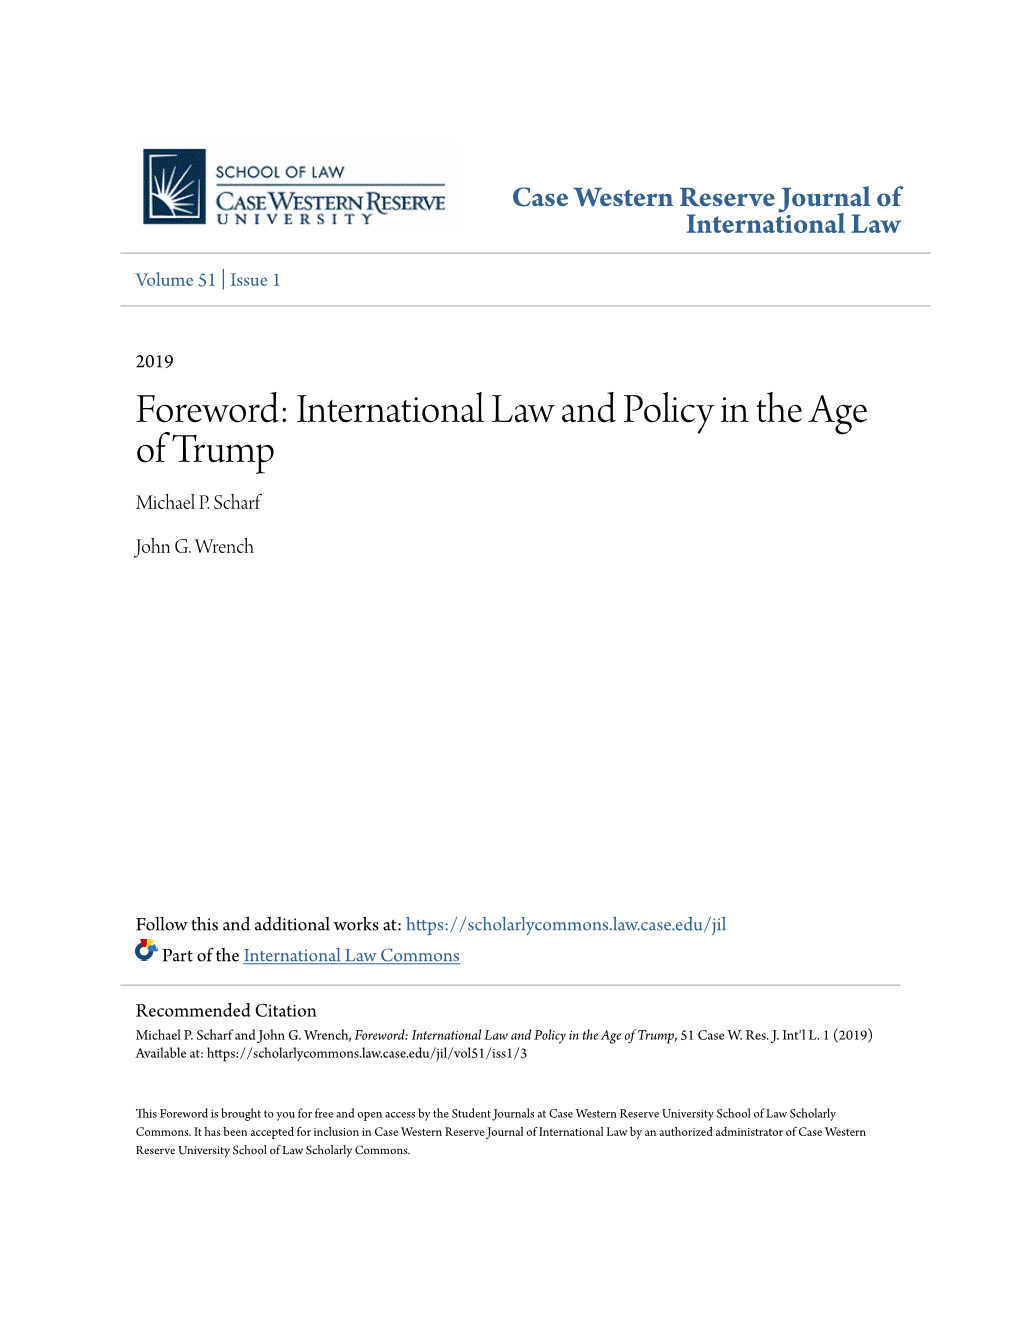 Foreword: International Law and Policy in the Age of Trump Michael P